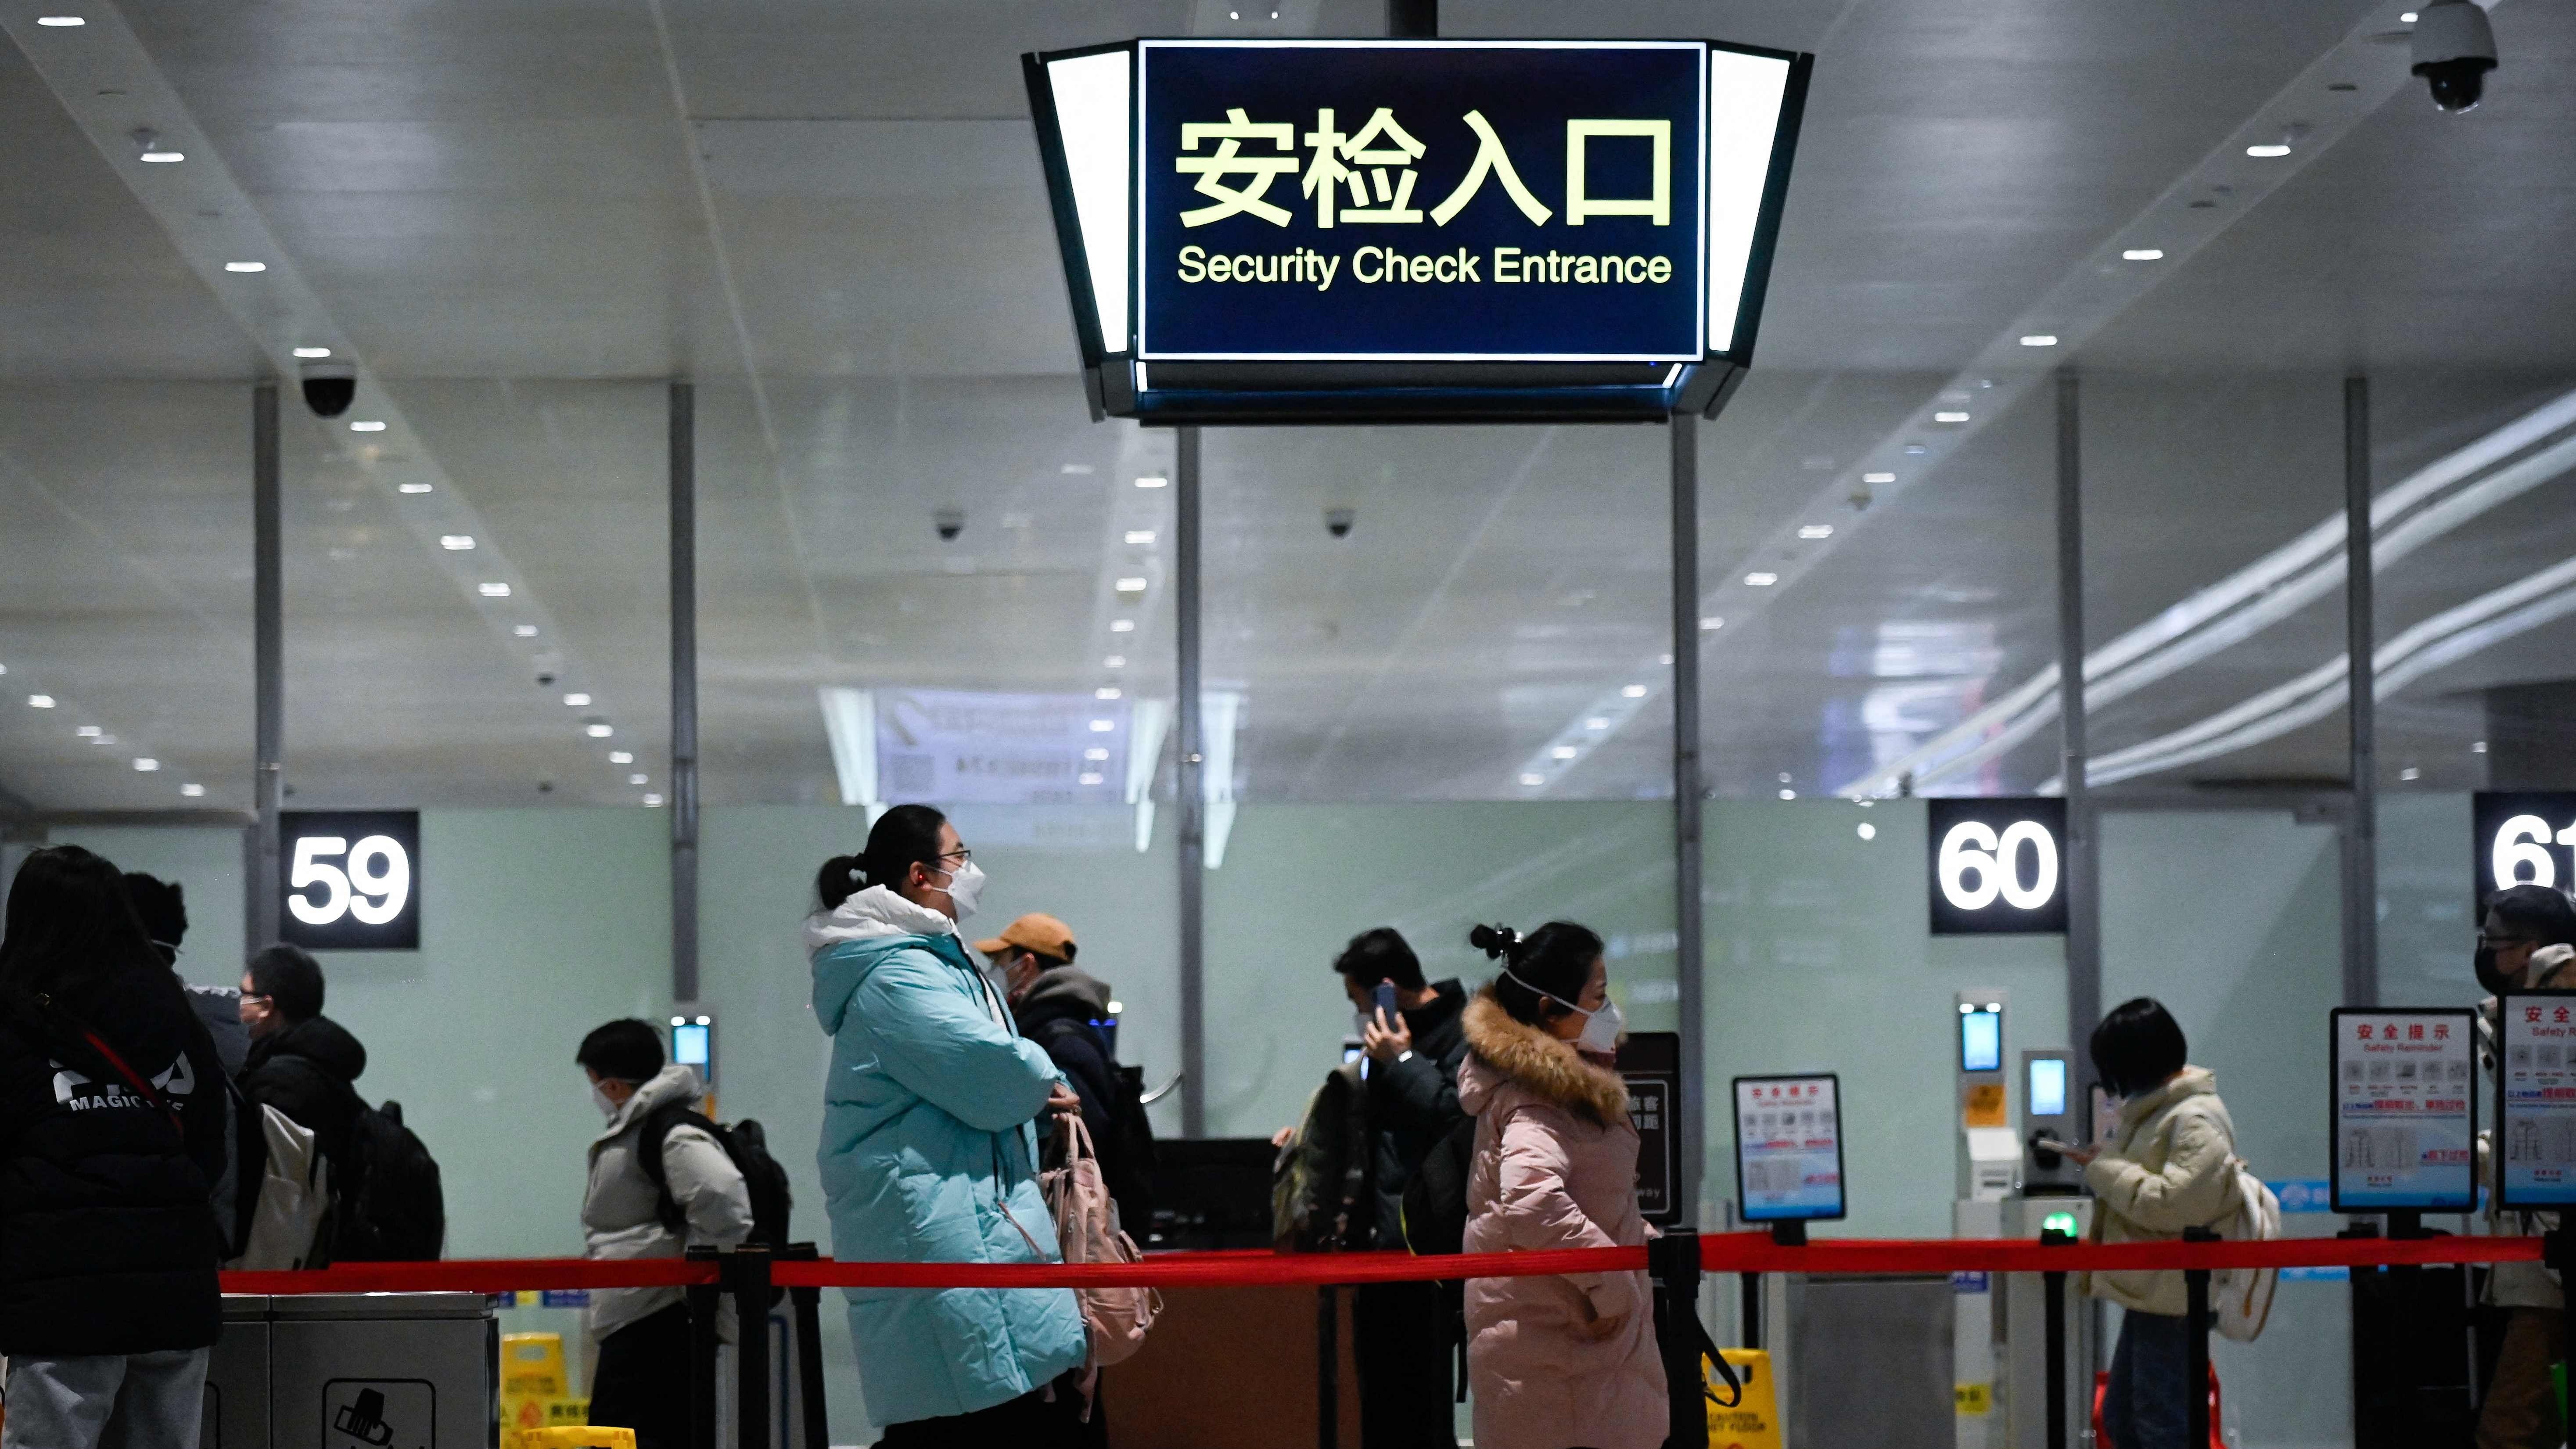 Passengers walk towards the entrance of the security check at Daxing International airport in Beijing. Credit: AFP Photo